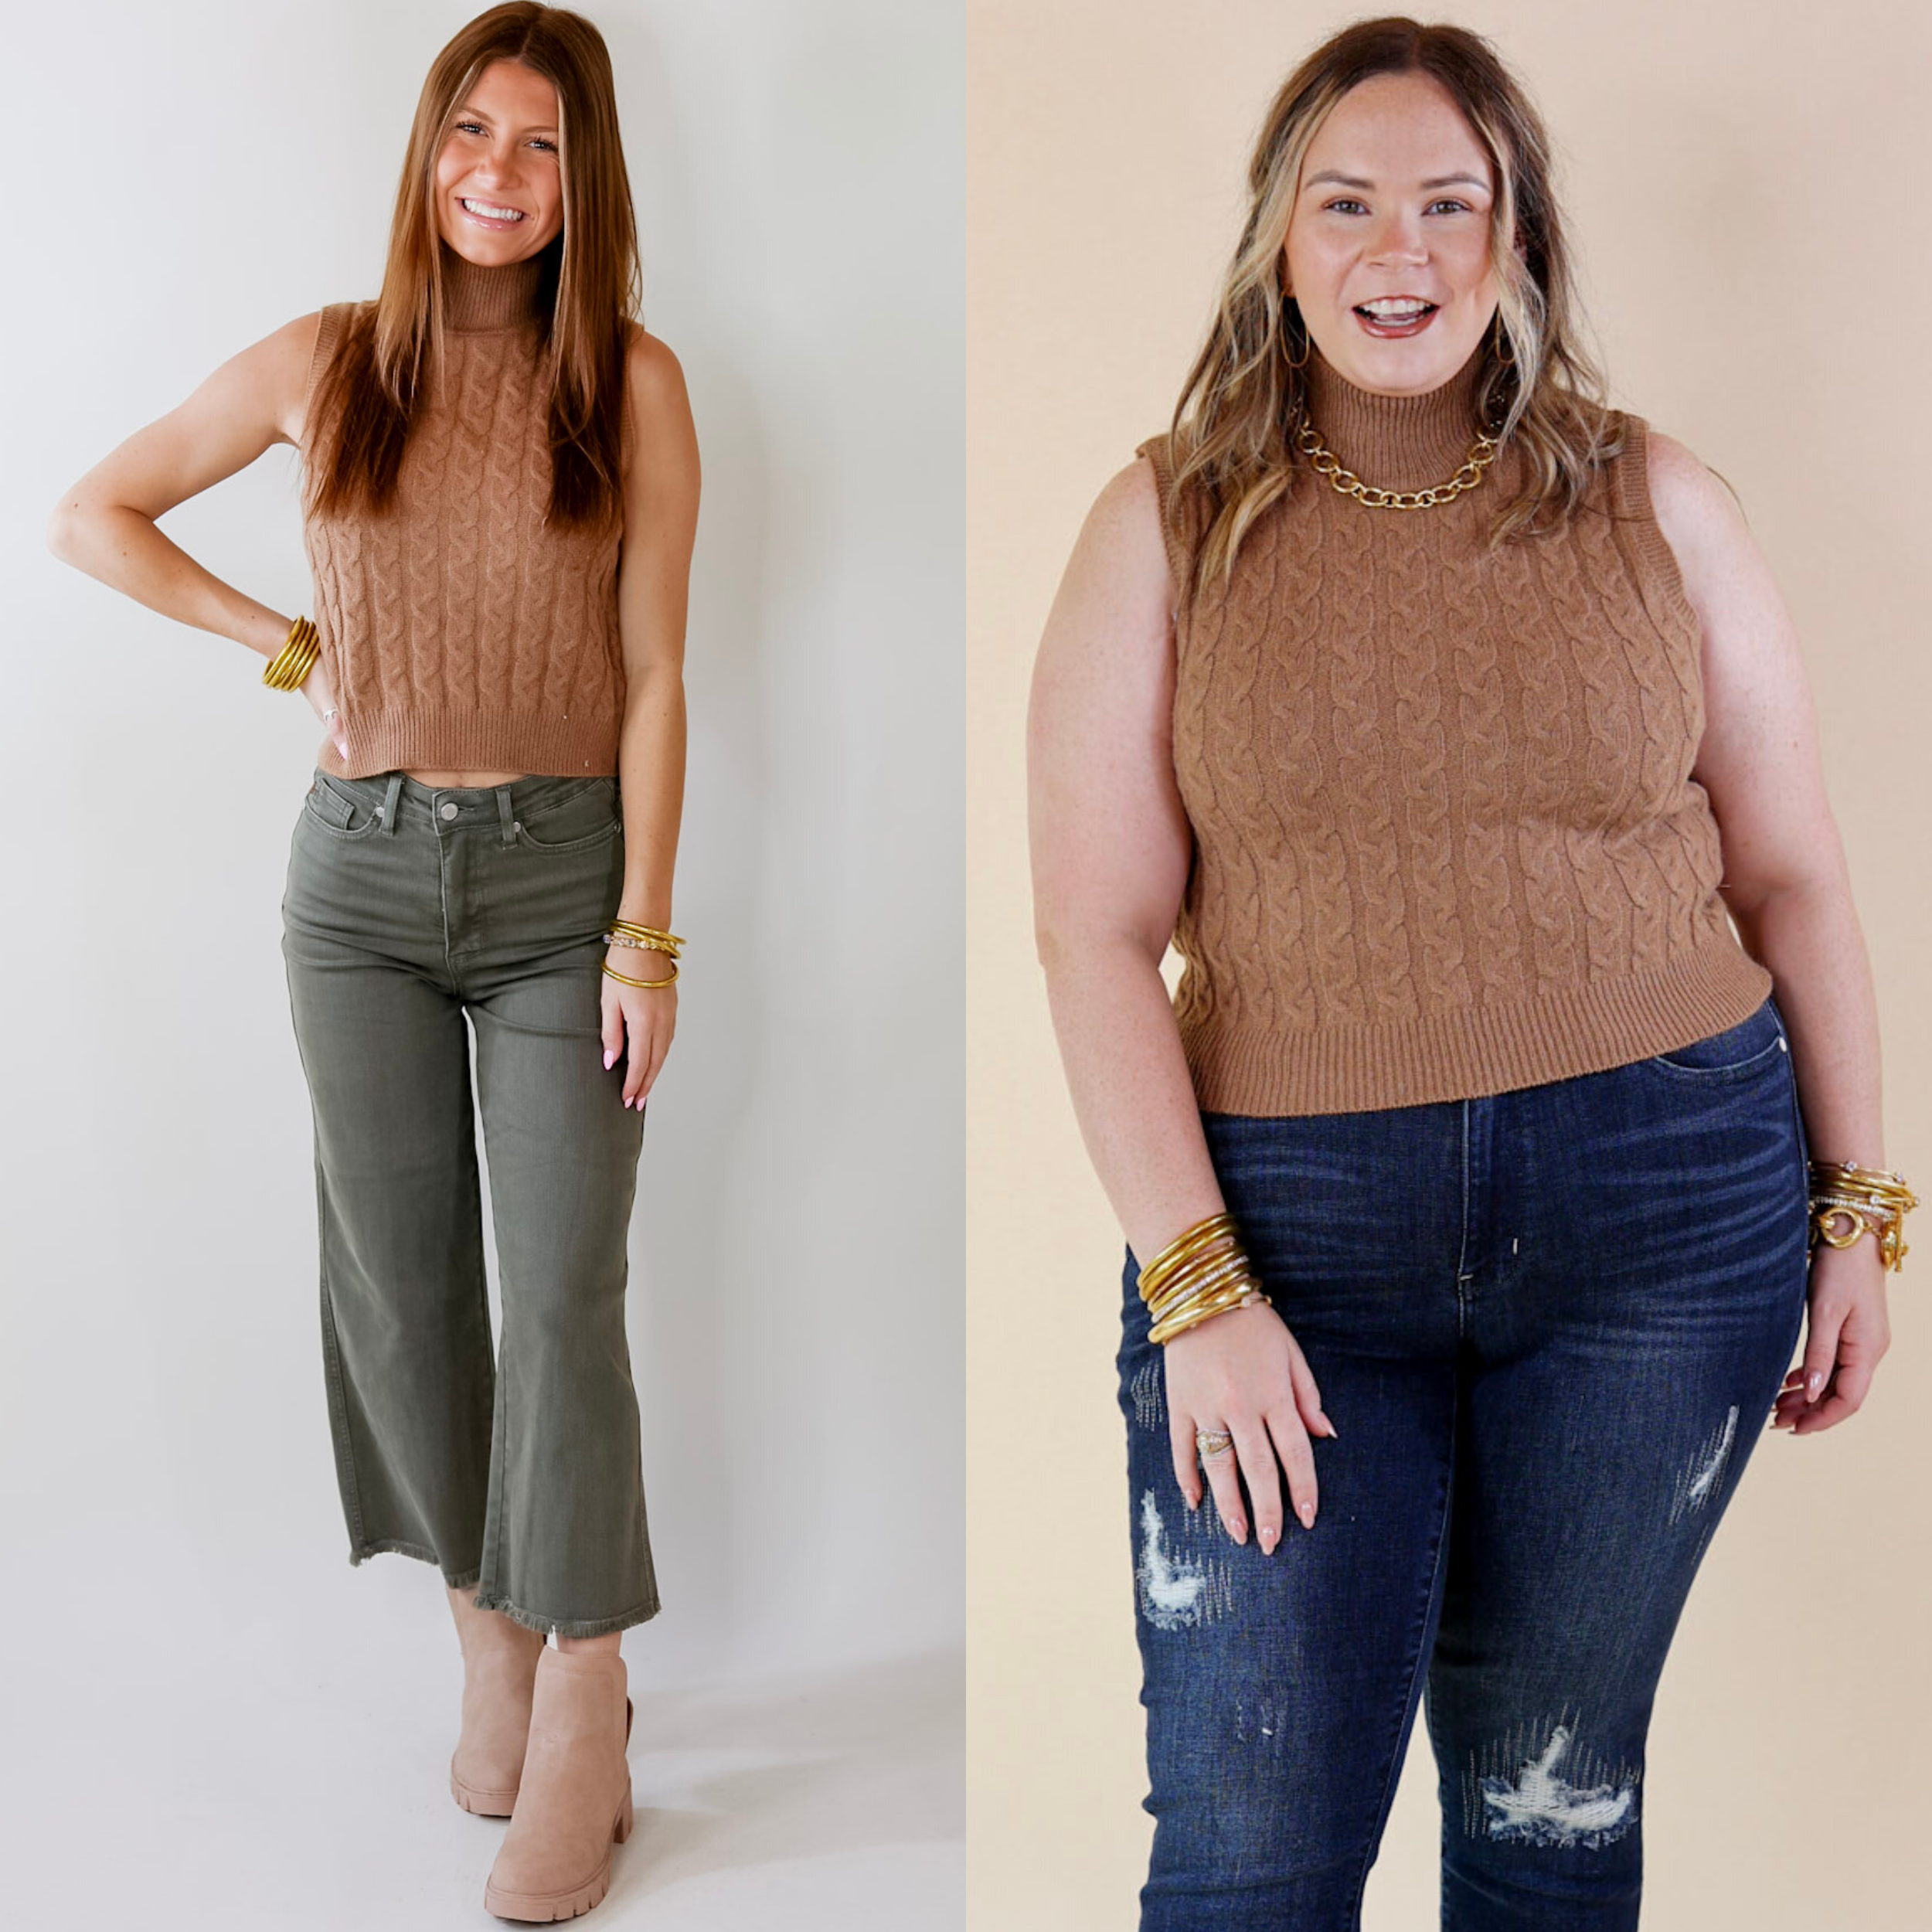 Model is wearing a sleeveless camel brown cropped sweater with a high neckline. Model has paired the sweater with olive green pants, beige booties, and gold tone jewelry.